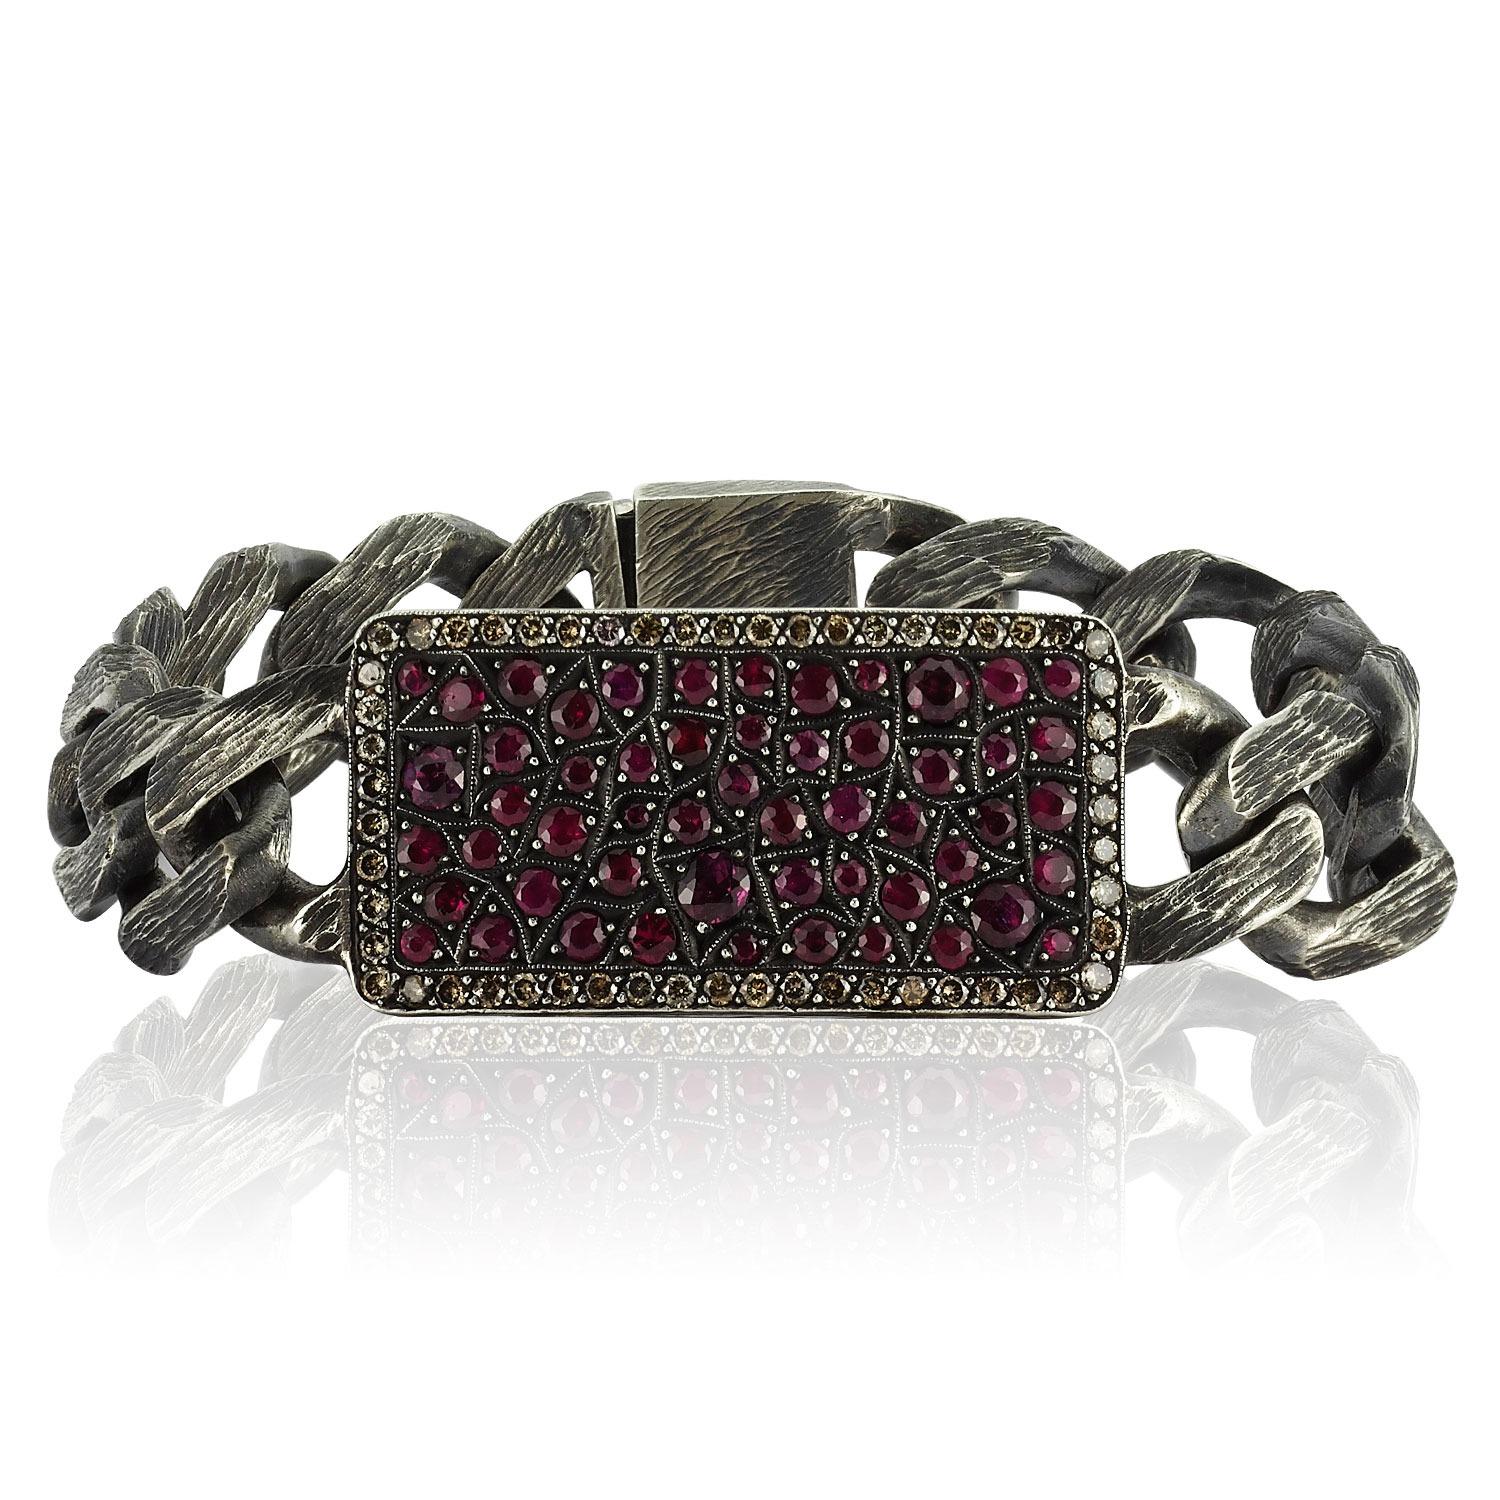 Block Chain Collection,bracelet,67 gm silver, 7,05 ct rubies, 1,40 ct champagne diamonds